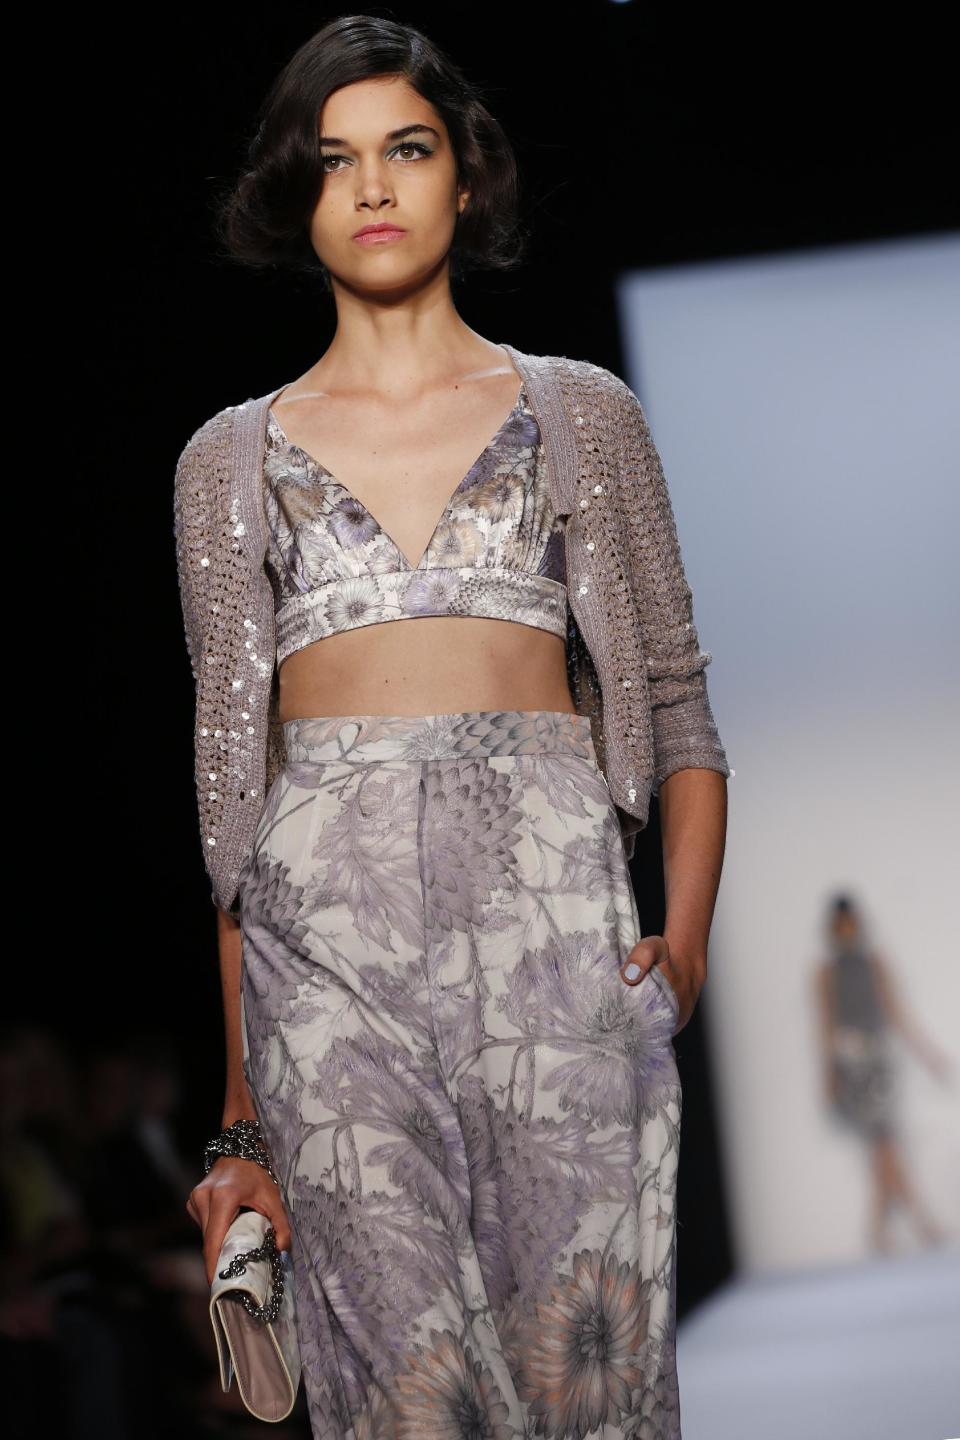 The Badgley Mischka Spring 2014 collection is modeled during Fashion Week in New York, Tuesday, Sept. 10, 2013. (AP Photo/John Minchillo)